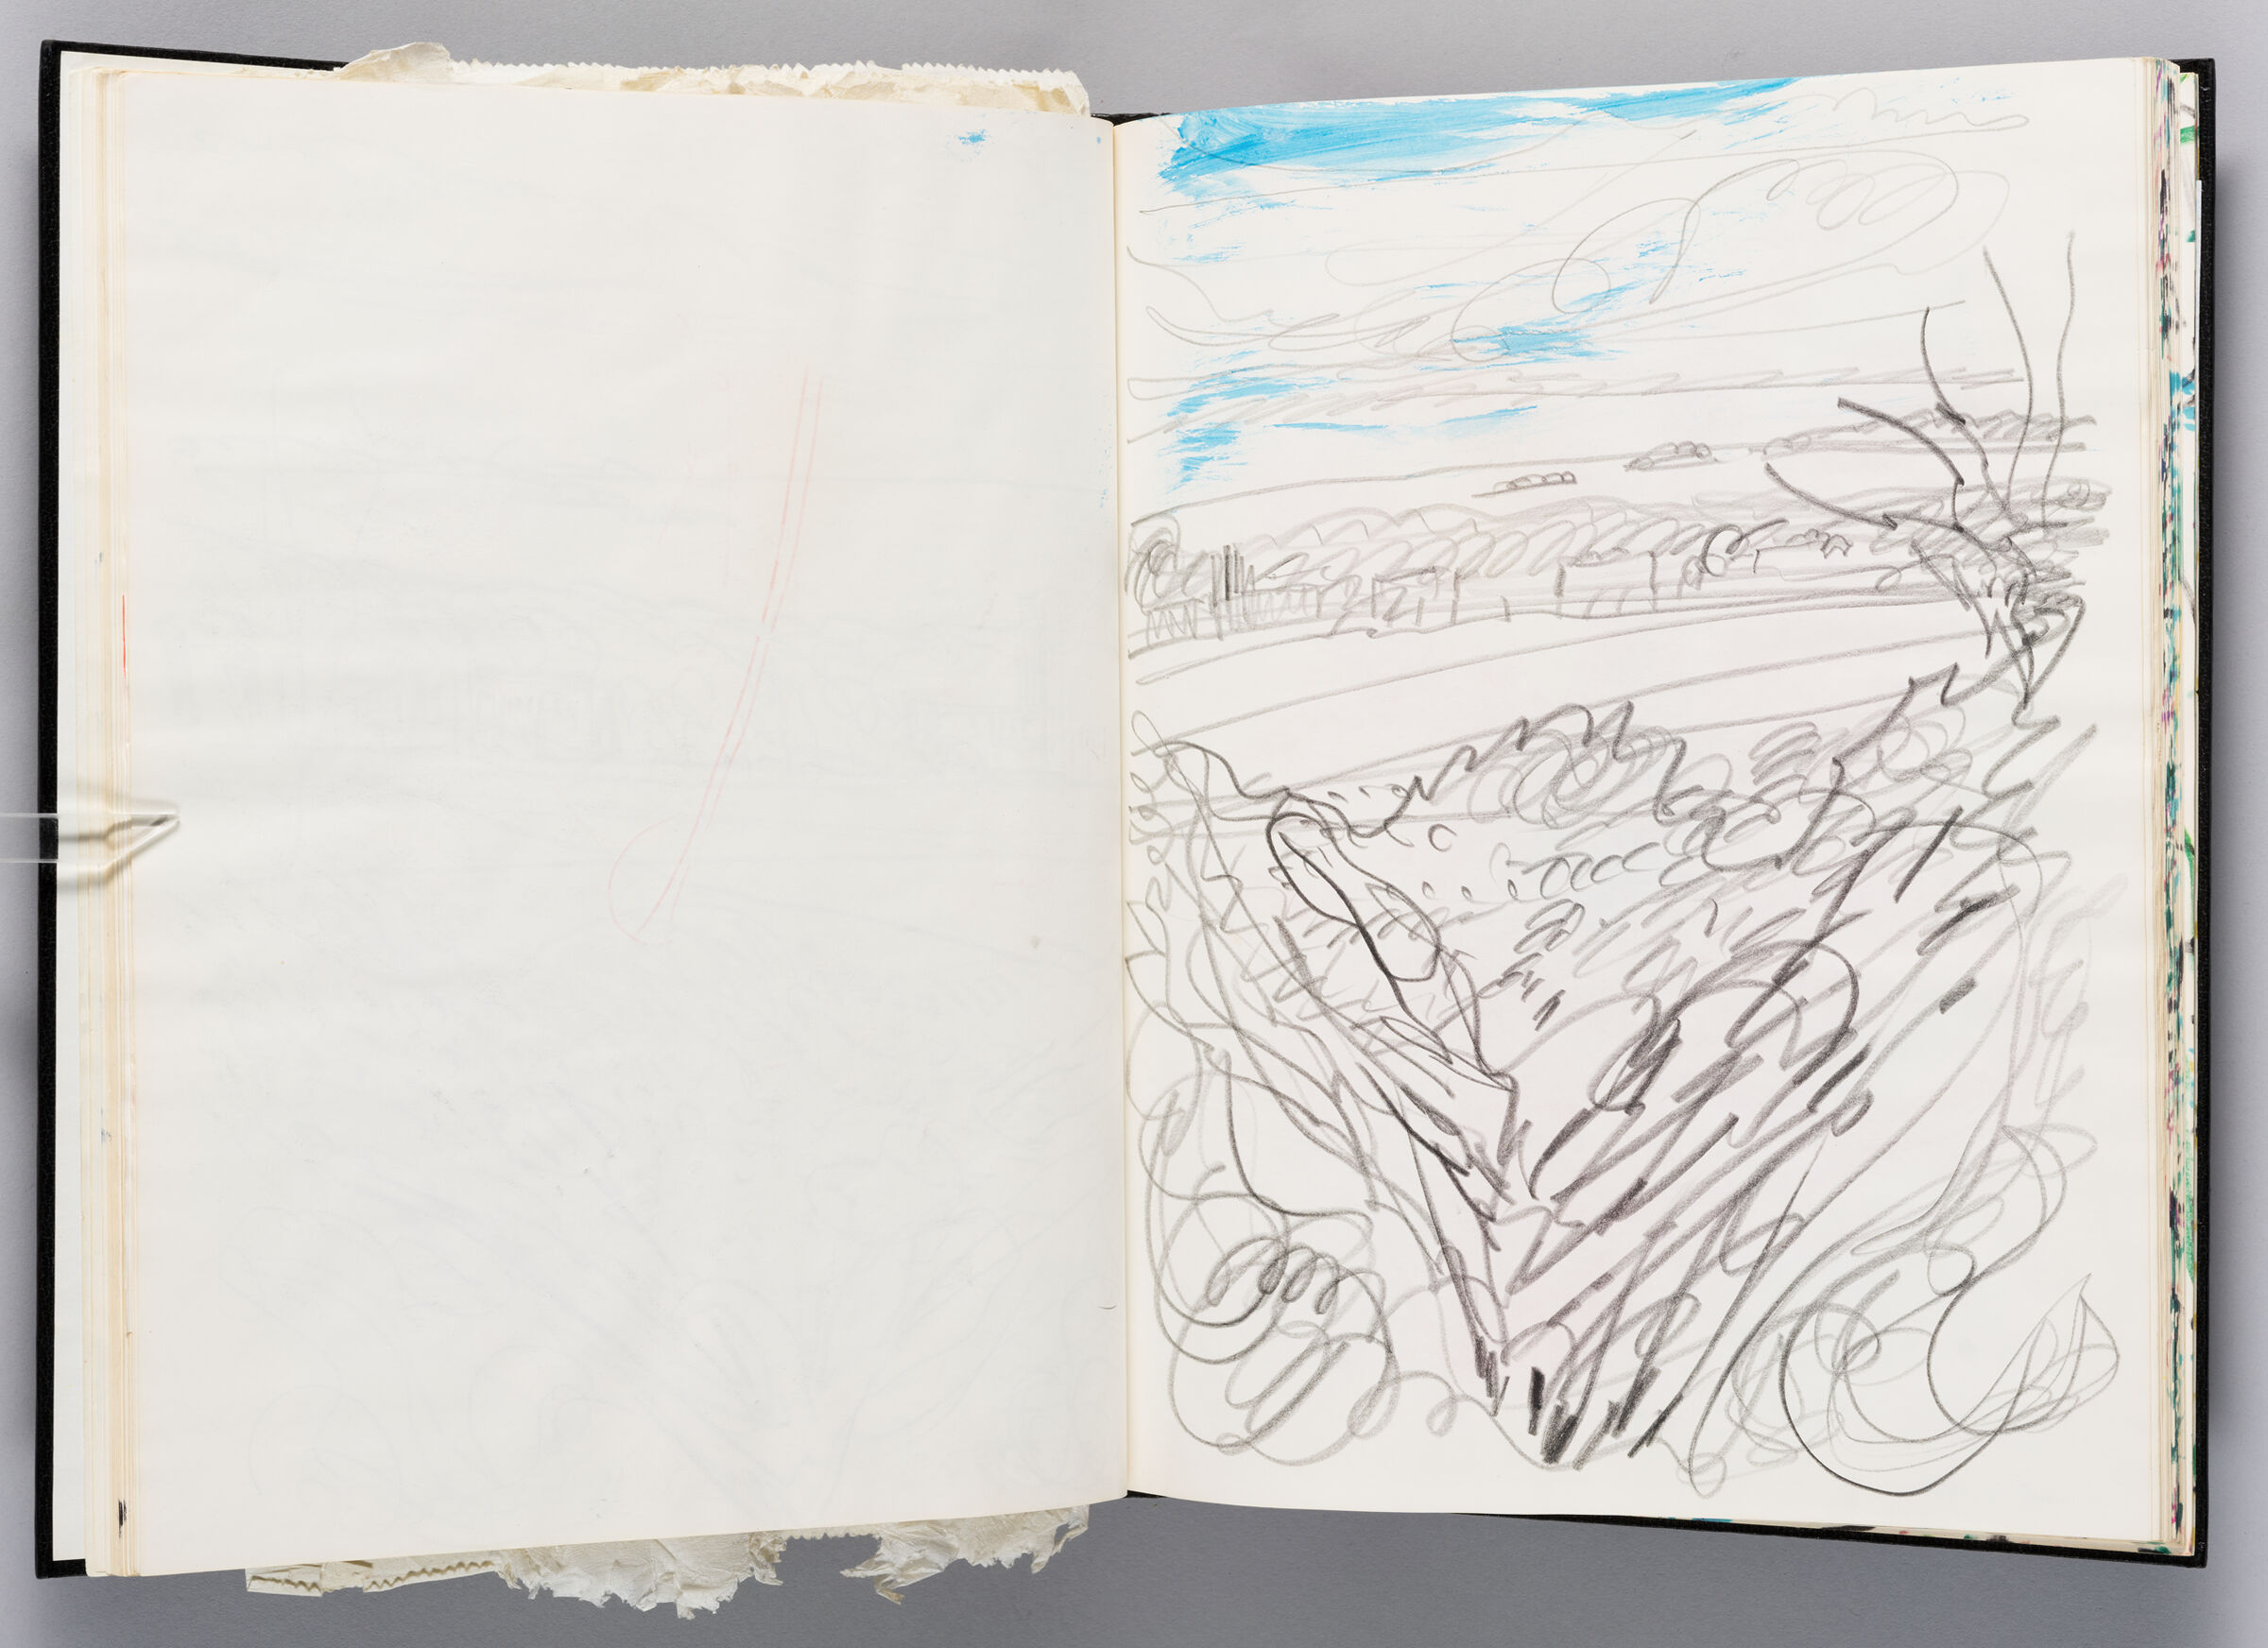 Untitled (Blank, Left Page); Untitled (View Of Port Of Spain, Right Page)